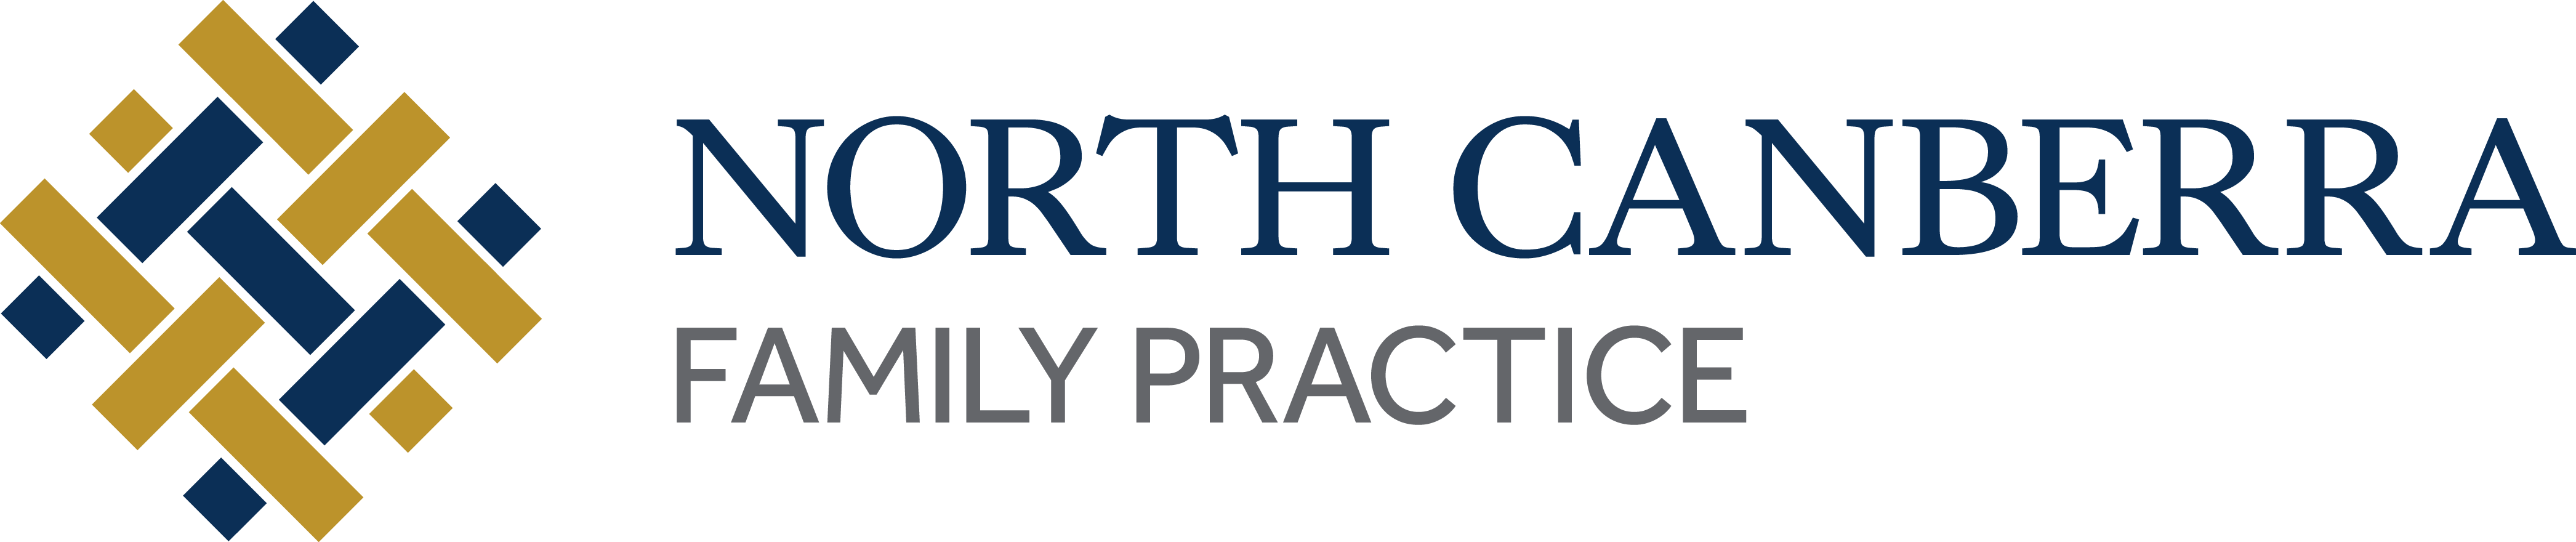 North Canberra Family Practice